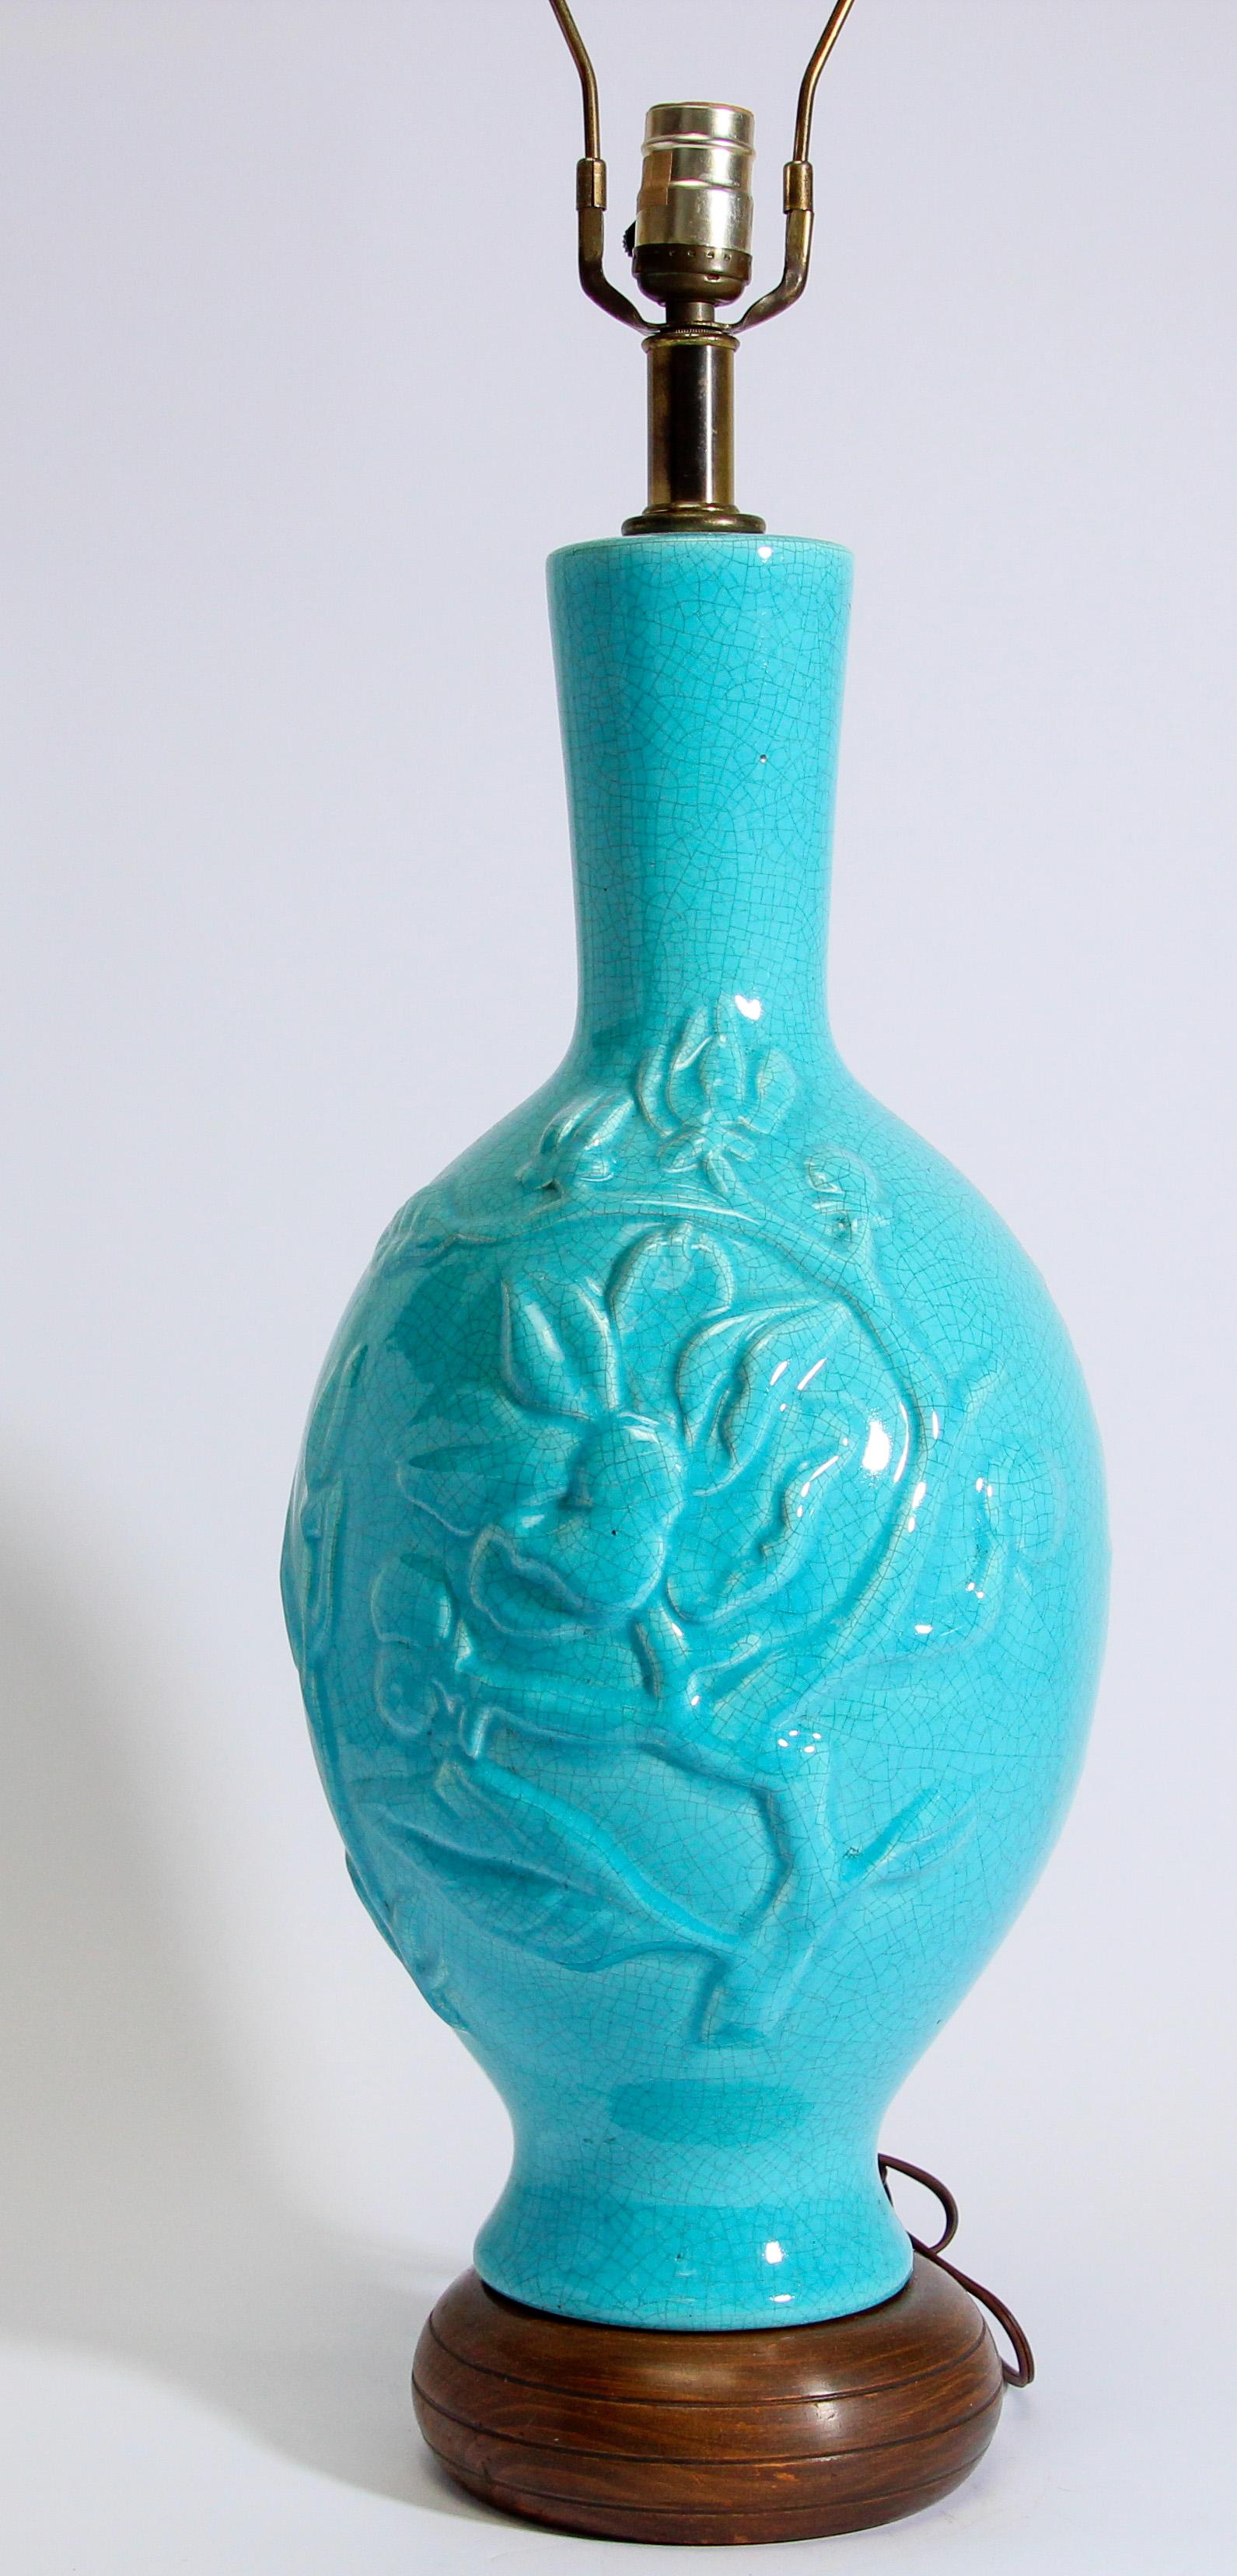 Vintage Asian oriental Chinese glazed crackled ceramic lamp in turquoise color with raised relief foliage and laughing Buddha.
This beautiful midcentury chinoiserie table lamp is timeless in style.
Mounted on wooden base.
The ceramic measures